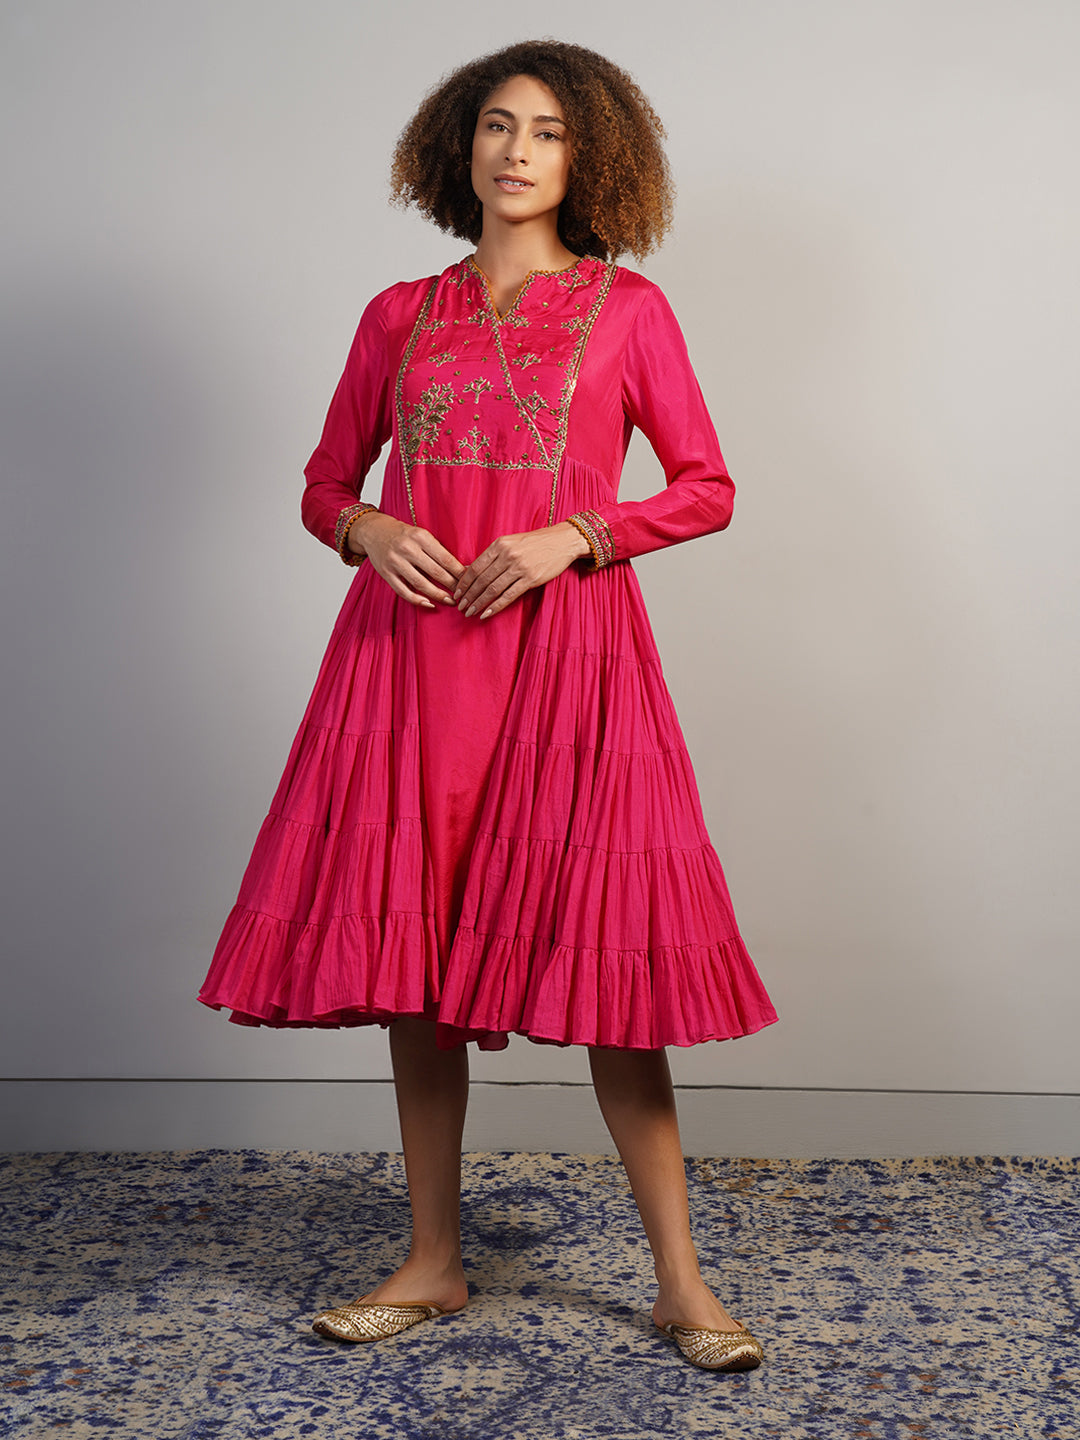 An A-line, tiered kurta in cotton along with silk sleeves